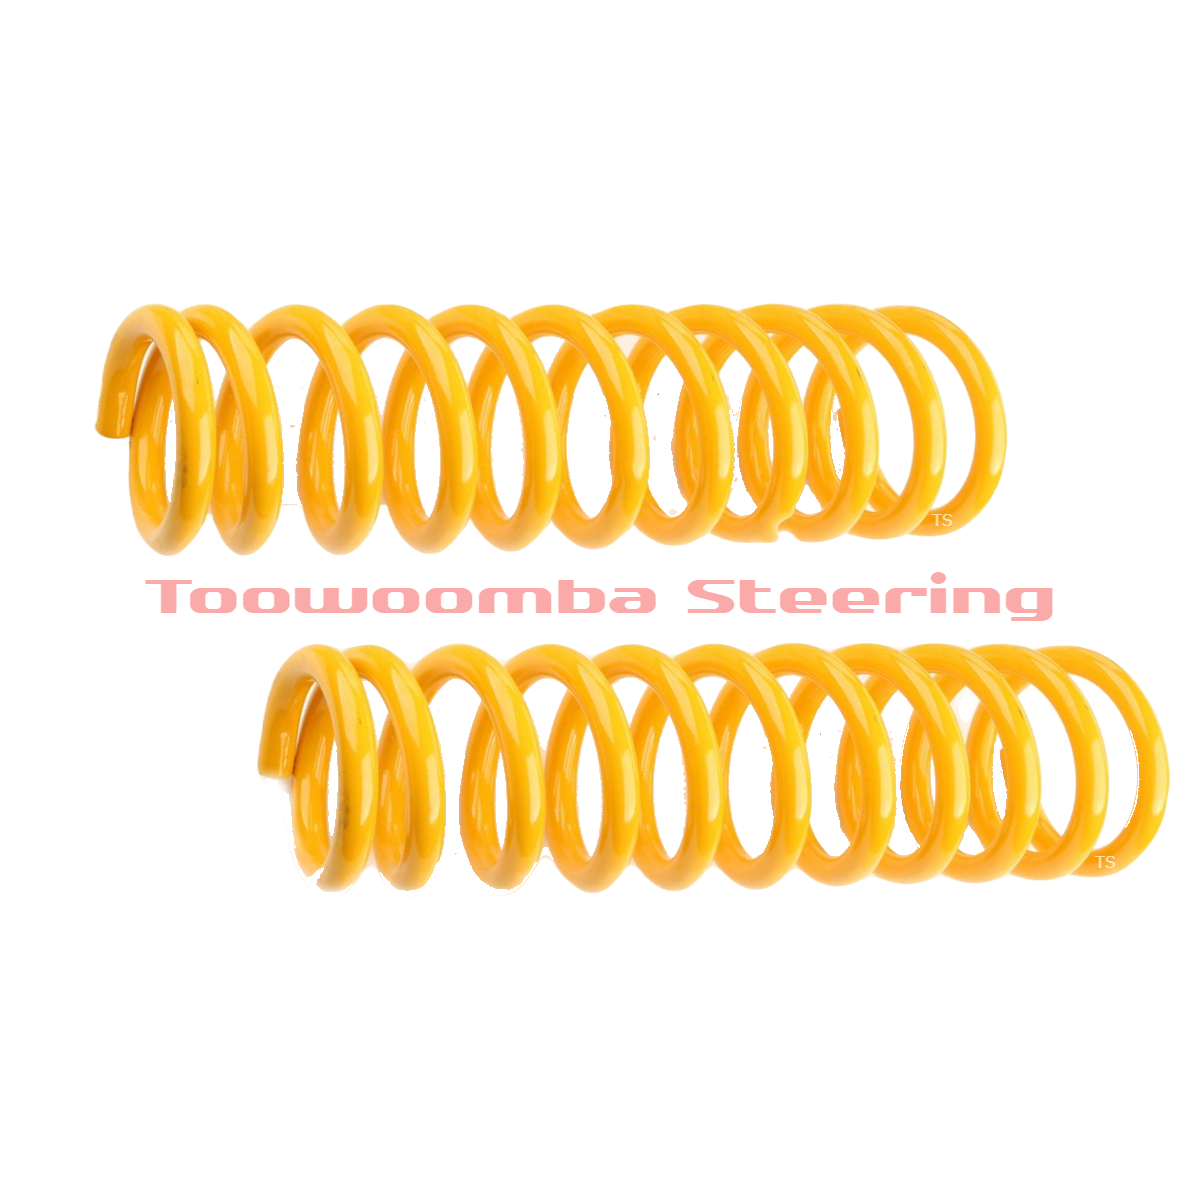 Rear Standard Height King Coil Springs - Ideal for - Holden H Series HQ; HJ; HX 6CYL & 8CYL- WAGON 71-77, H Series HZ RTS 6CYL & 8CYL- WAGON 78-79, Statesman HQ; HX 1971 – 1978, Statesman HZ; WB 1978 – 1985 - (KHRS-05)